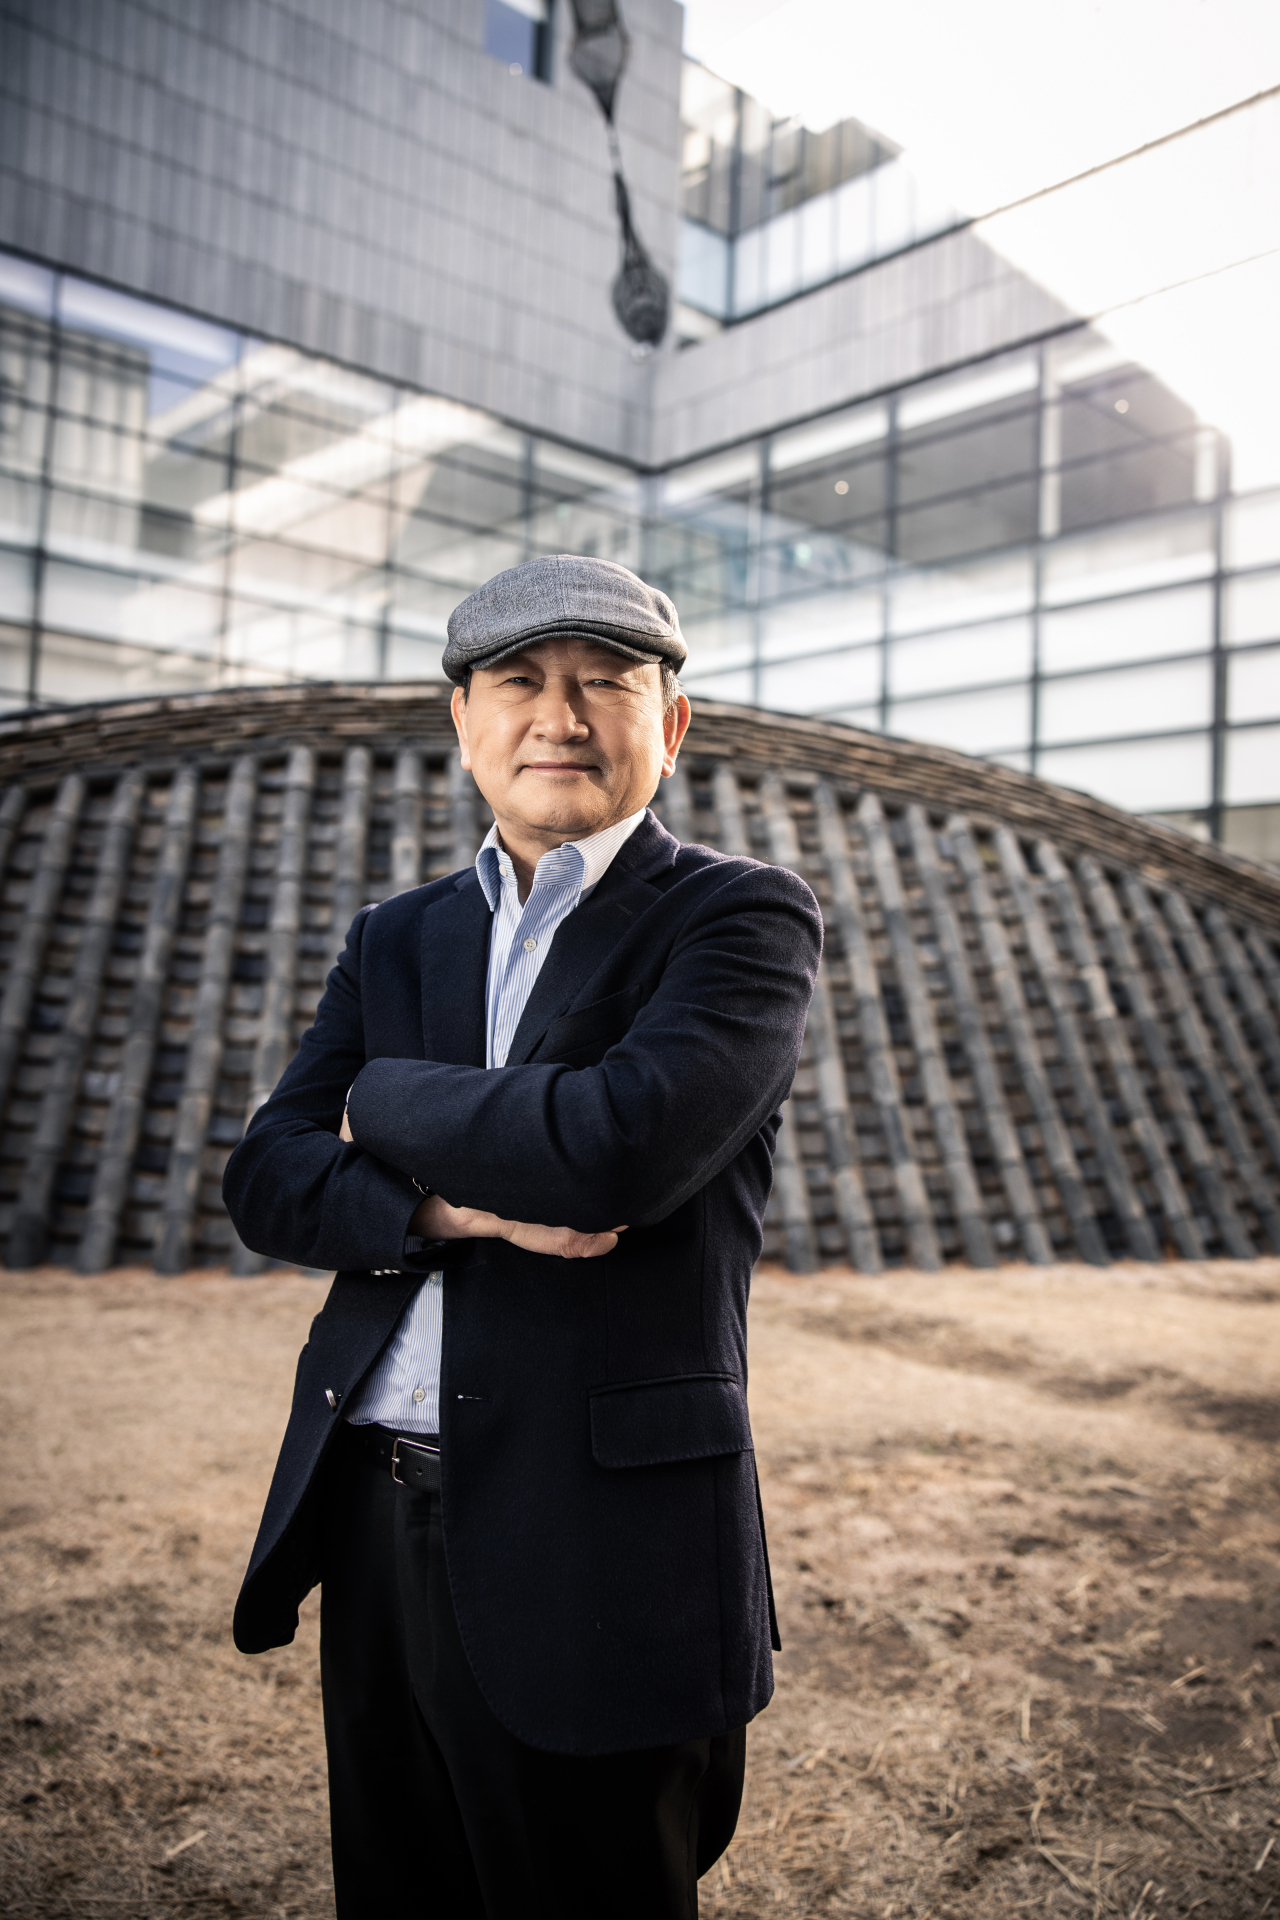 Youn Bum-mo, the former director of the National Museum of Modern and Contemporary Art, Korea (MMCA)